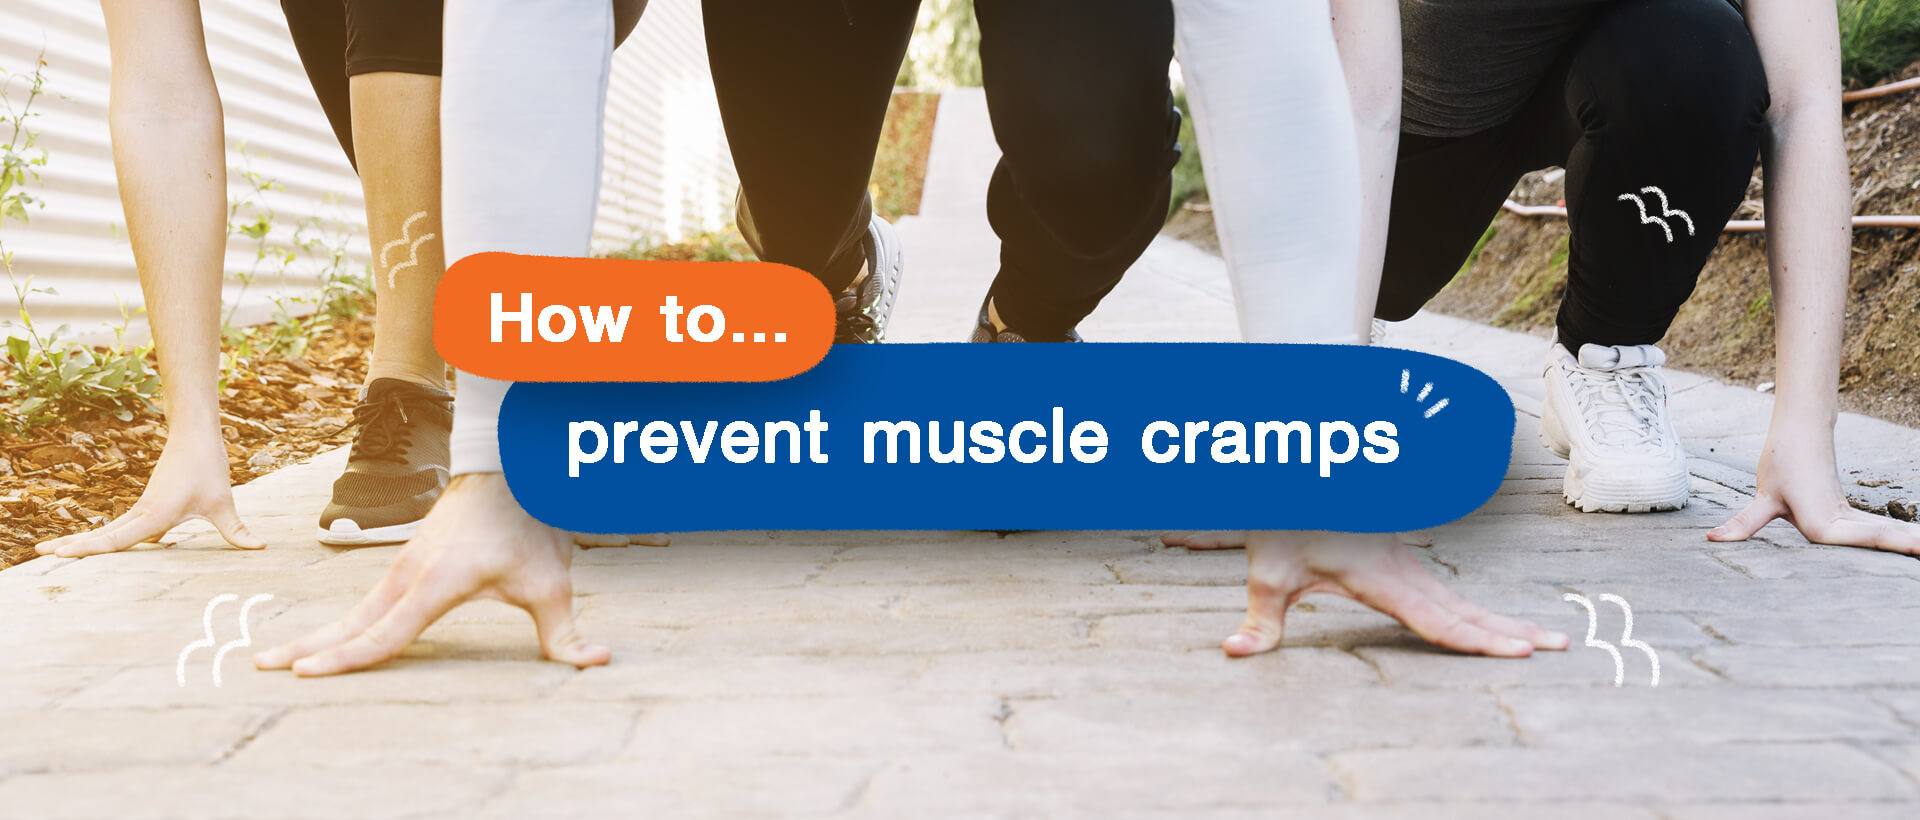 How to prevent muscle cramps